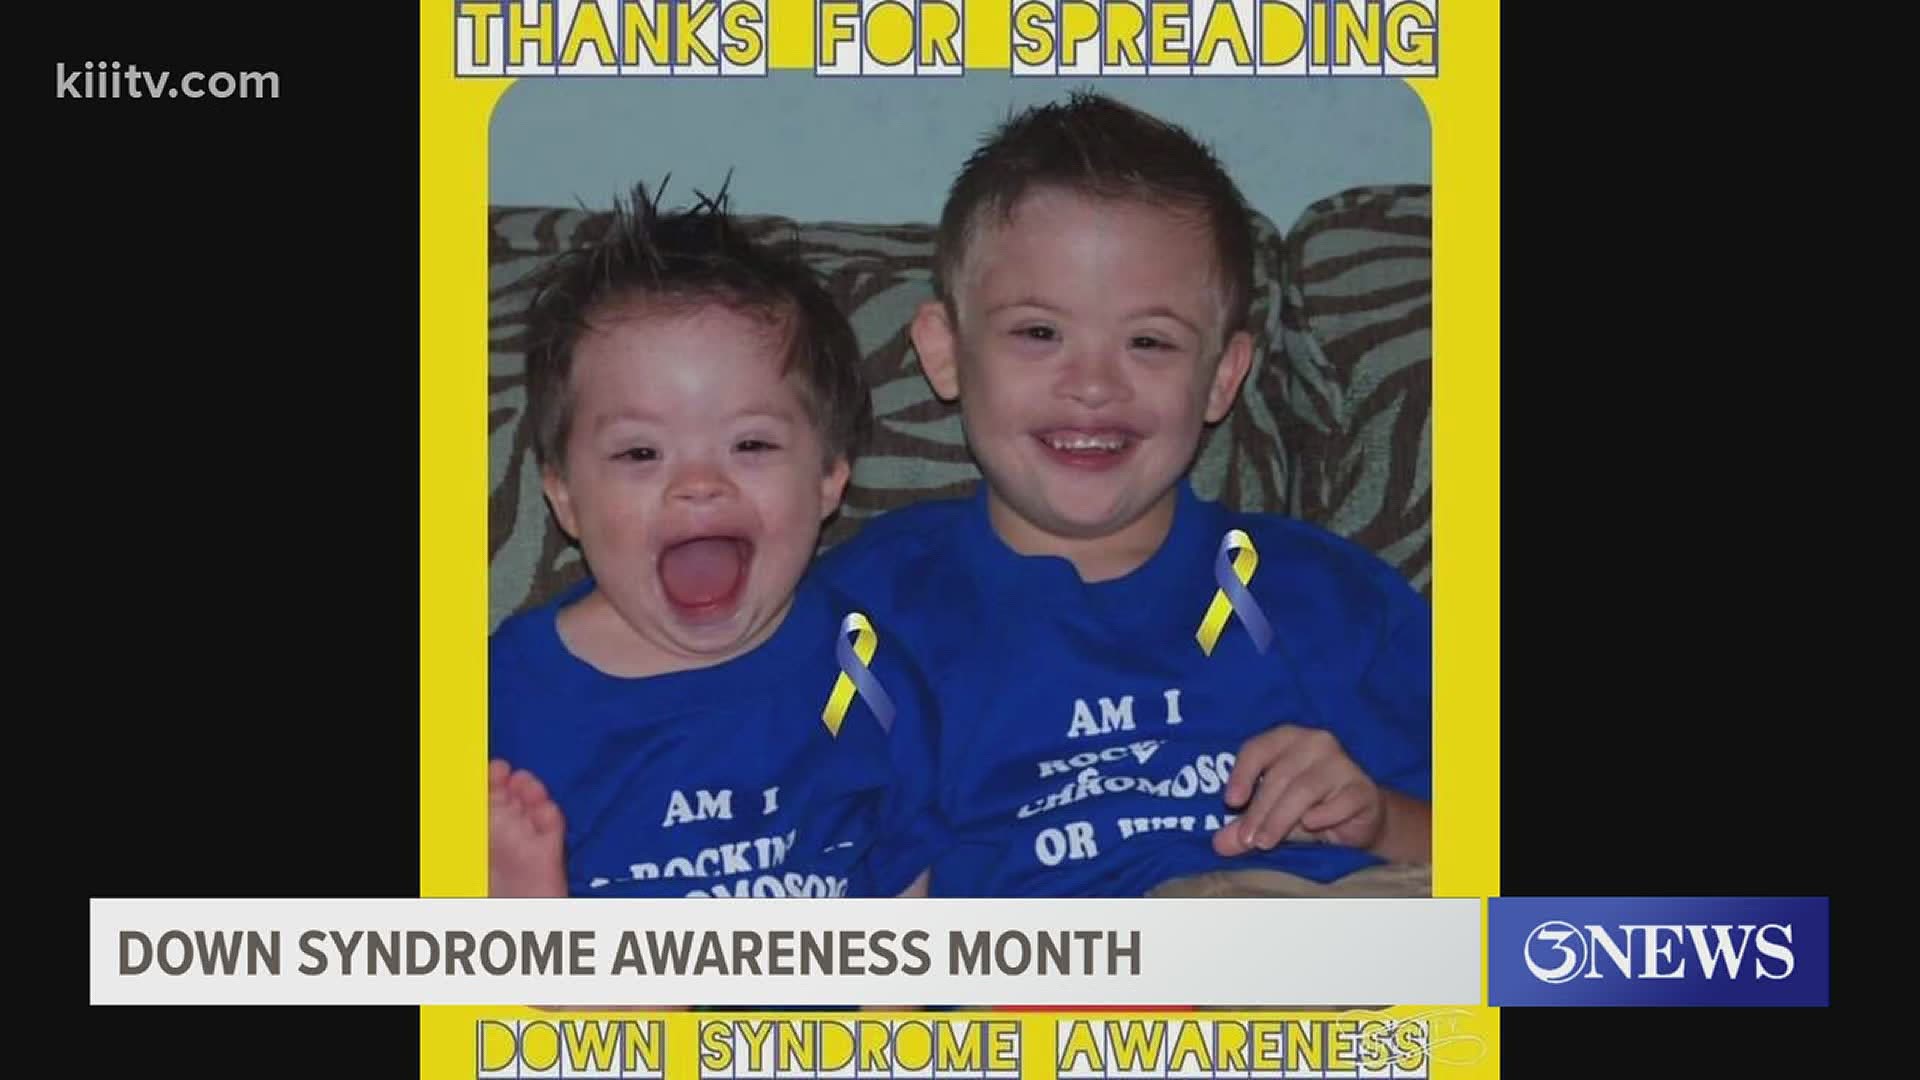 The month of October recognizes so many important causes. One of those is Down Syndrome Awareness.